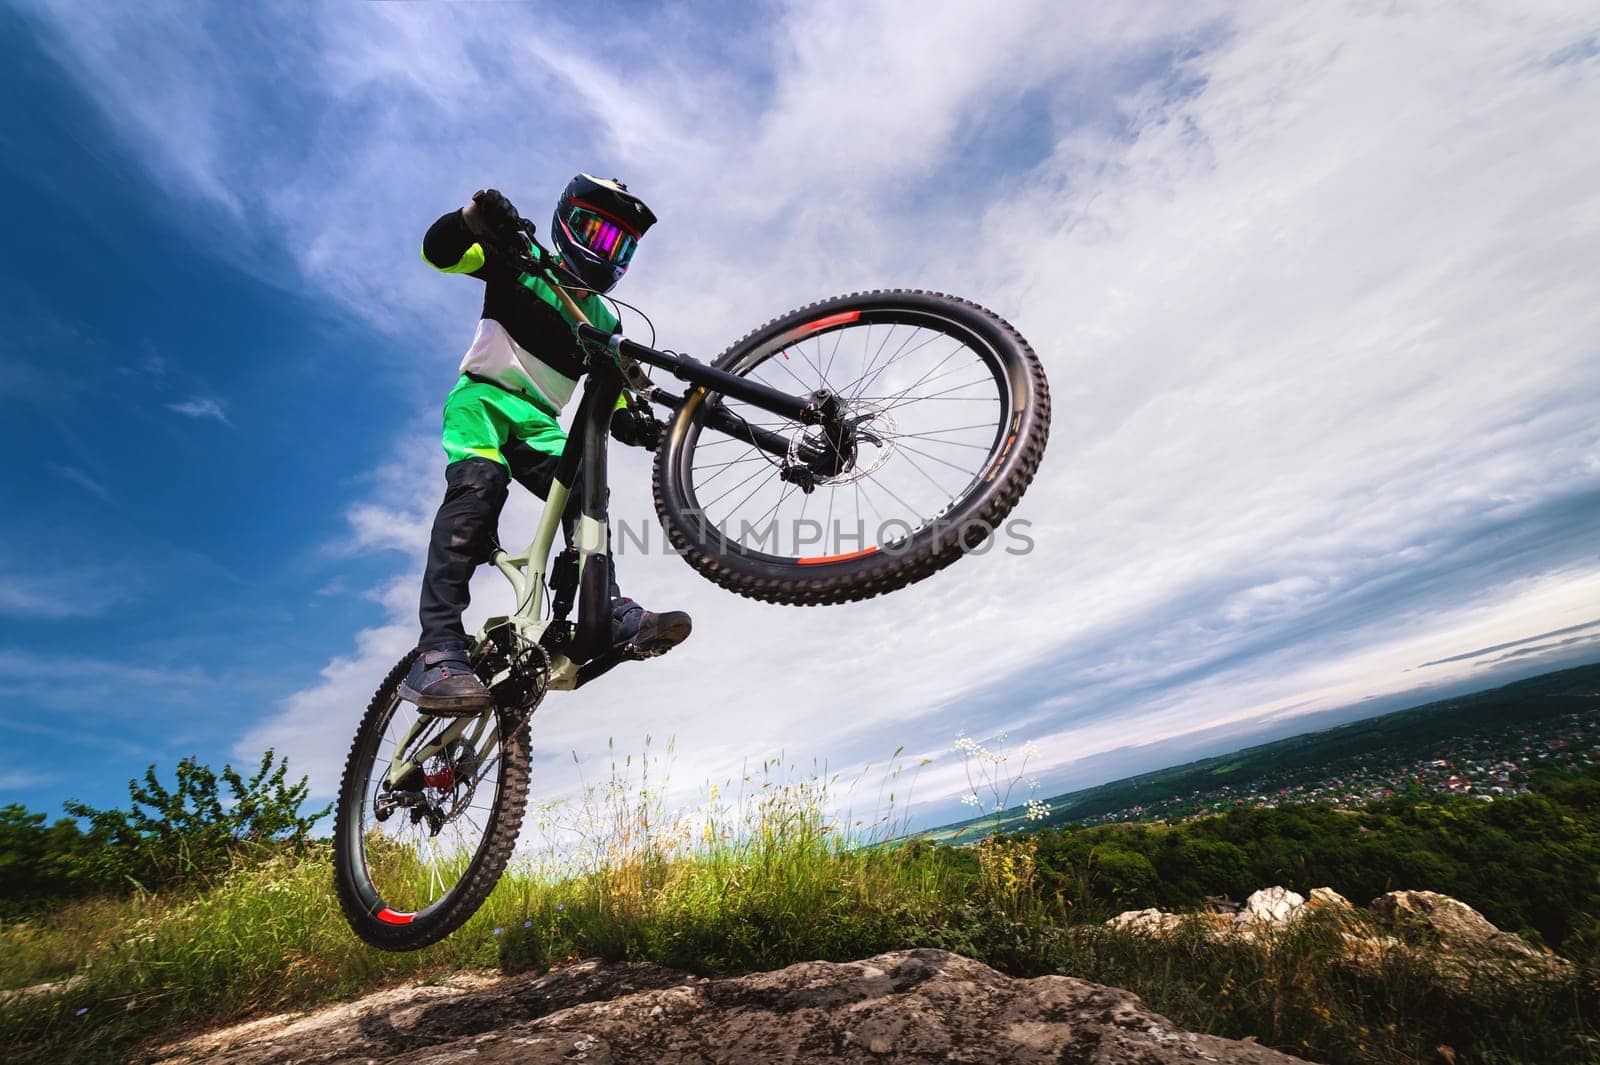 professional racer jumps on a bicycle against a blue cloudy sky. Sunny summer day. Low angle view of a man on a mountain bike jumping in the mountains by yanik88